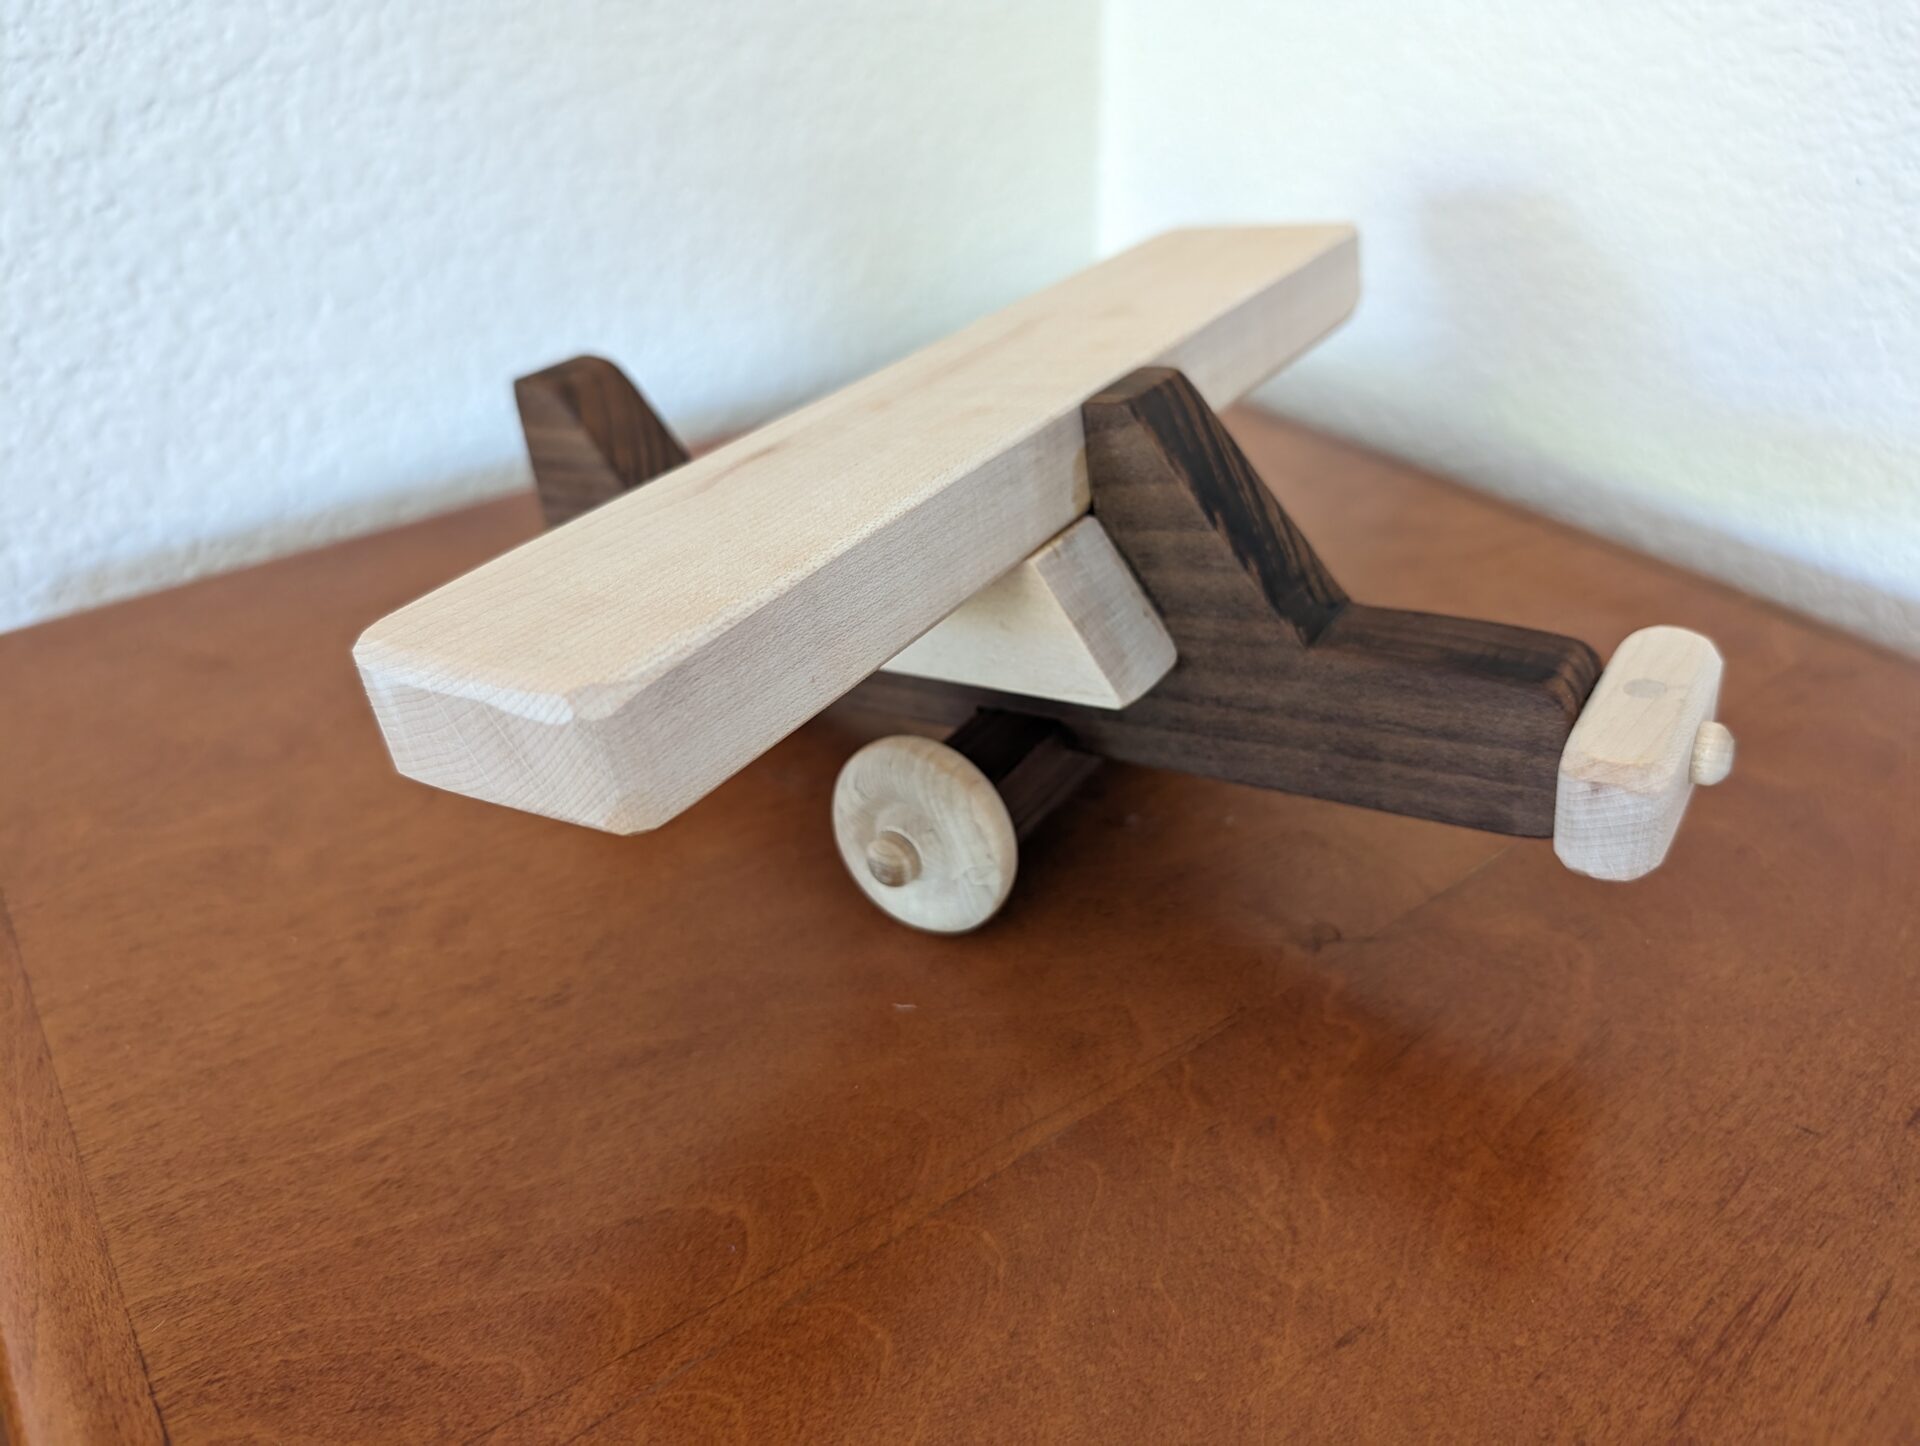 Completed wooden toy monoplane